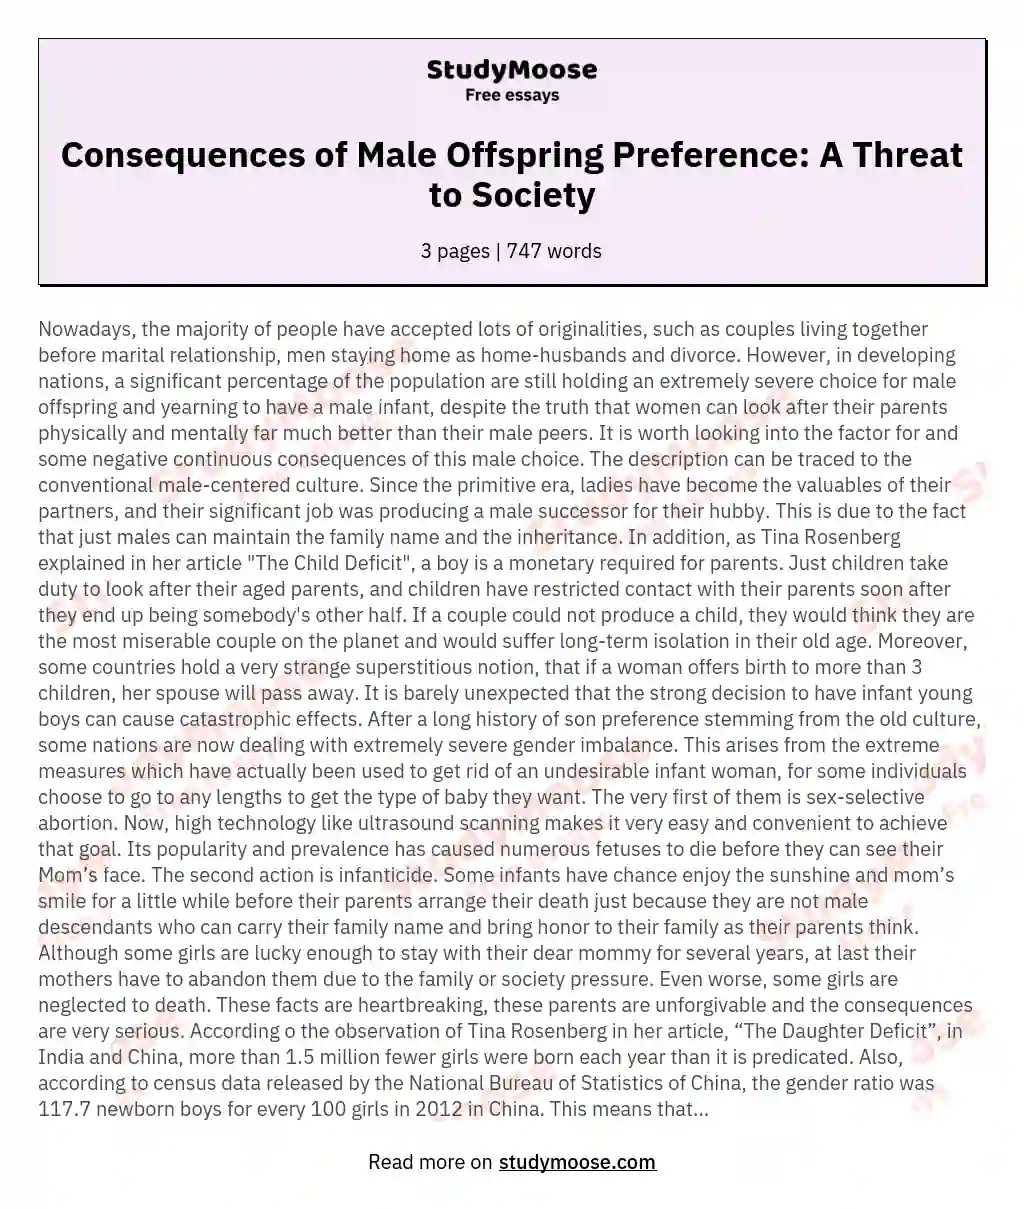 Consequences of Male Offspring Preference: A Threat to Society essay